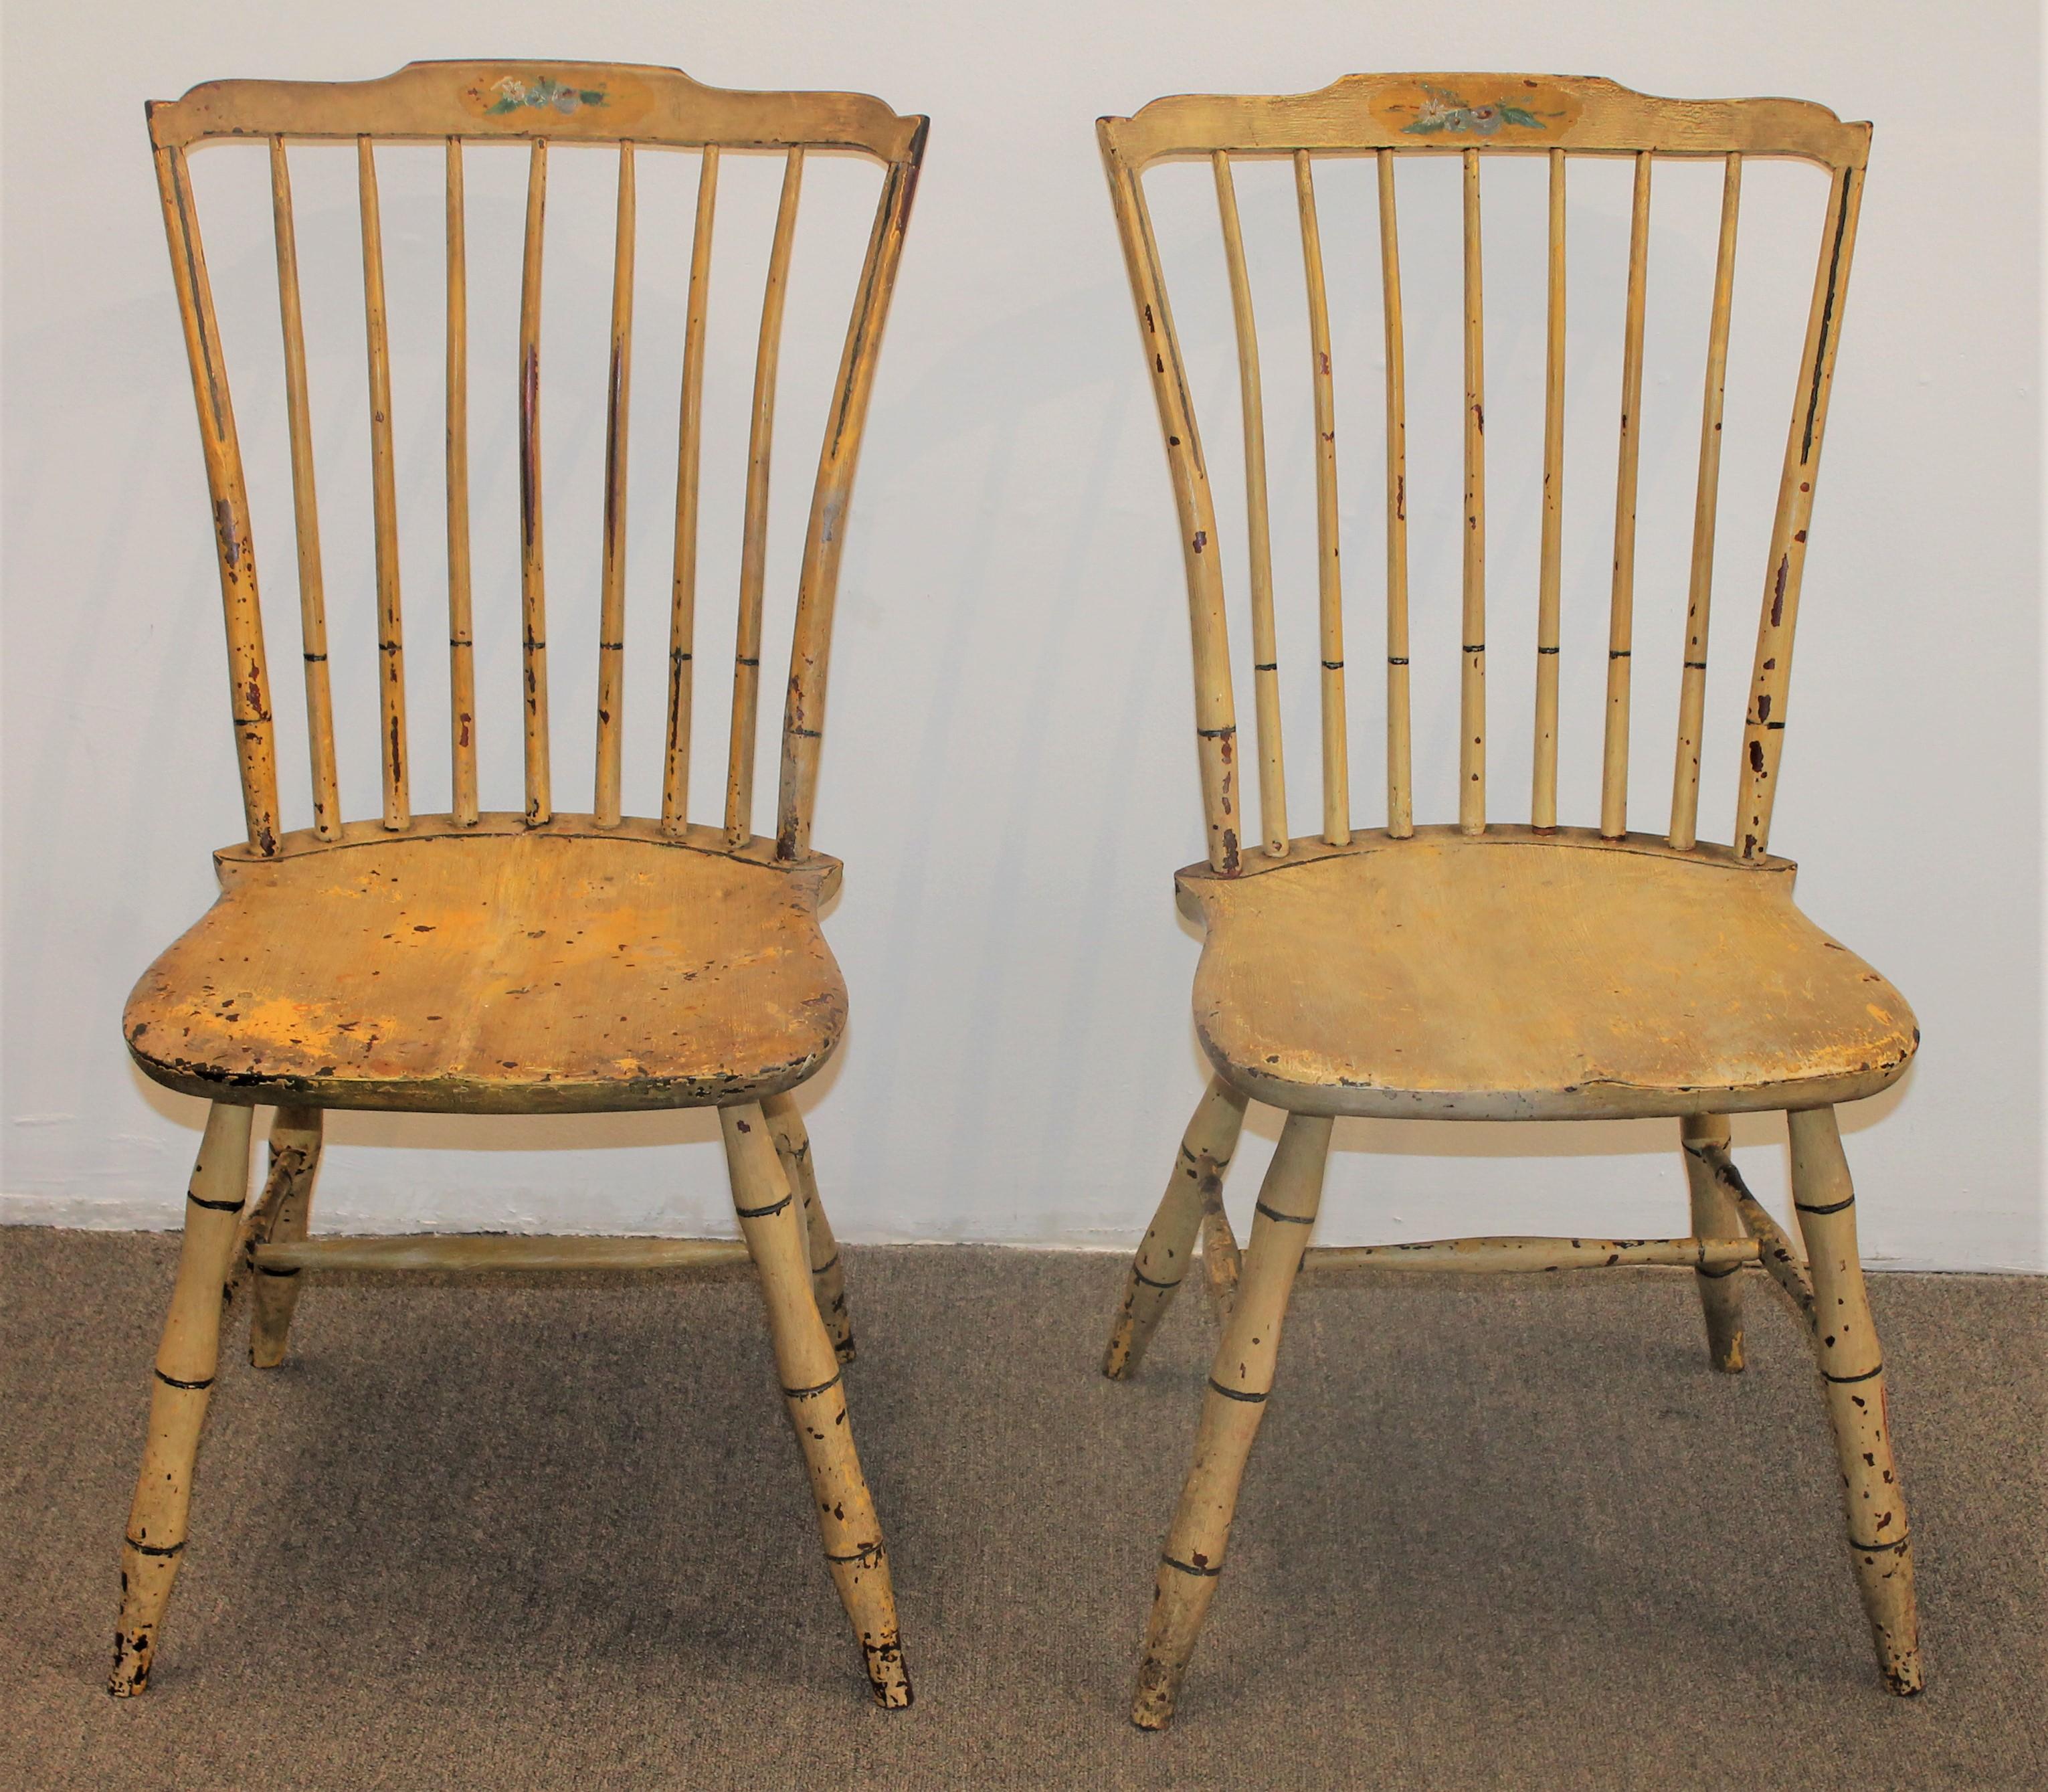 These fine early original yellow painted New England Windsor chairs are in good condition. They are paint decorated floral pattern on the front of the inside slat. They have minor paint loss throughout as seen in the pics with a nice patina surface